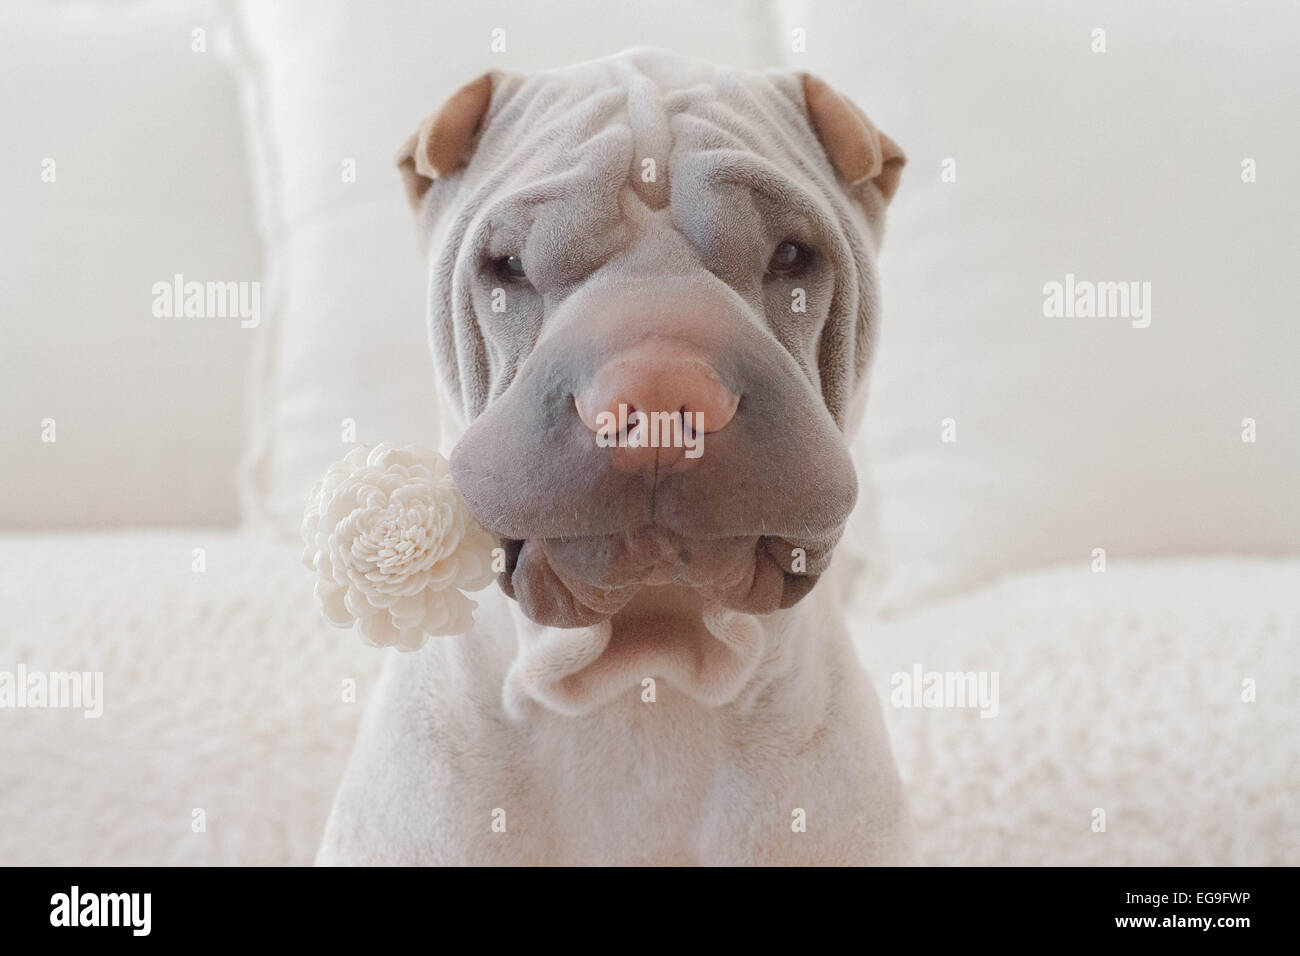 Shar pei dog with white flower in mouth Stock Photo